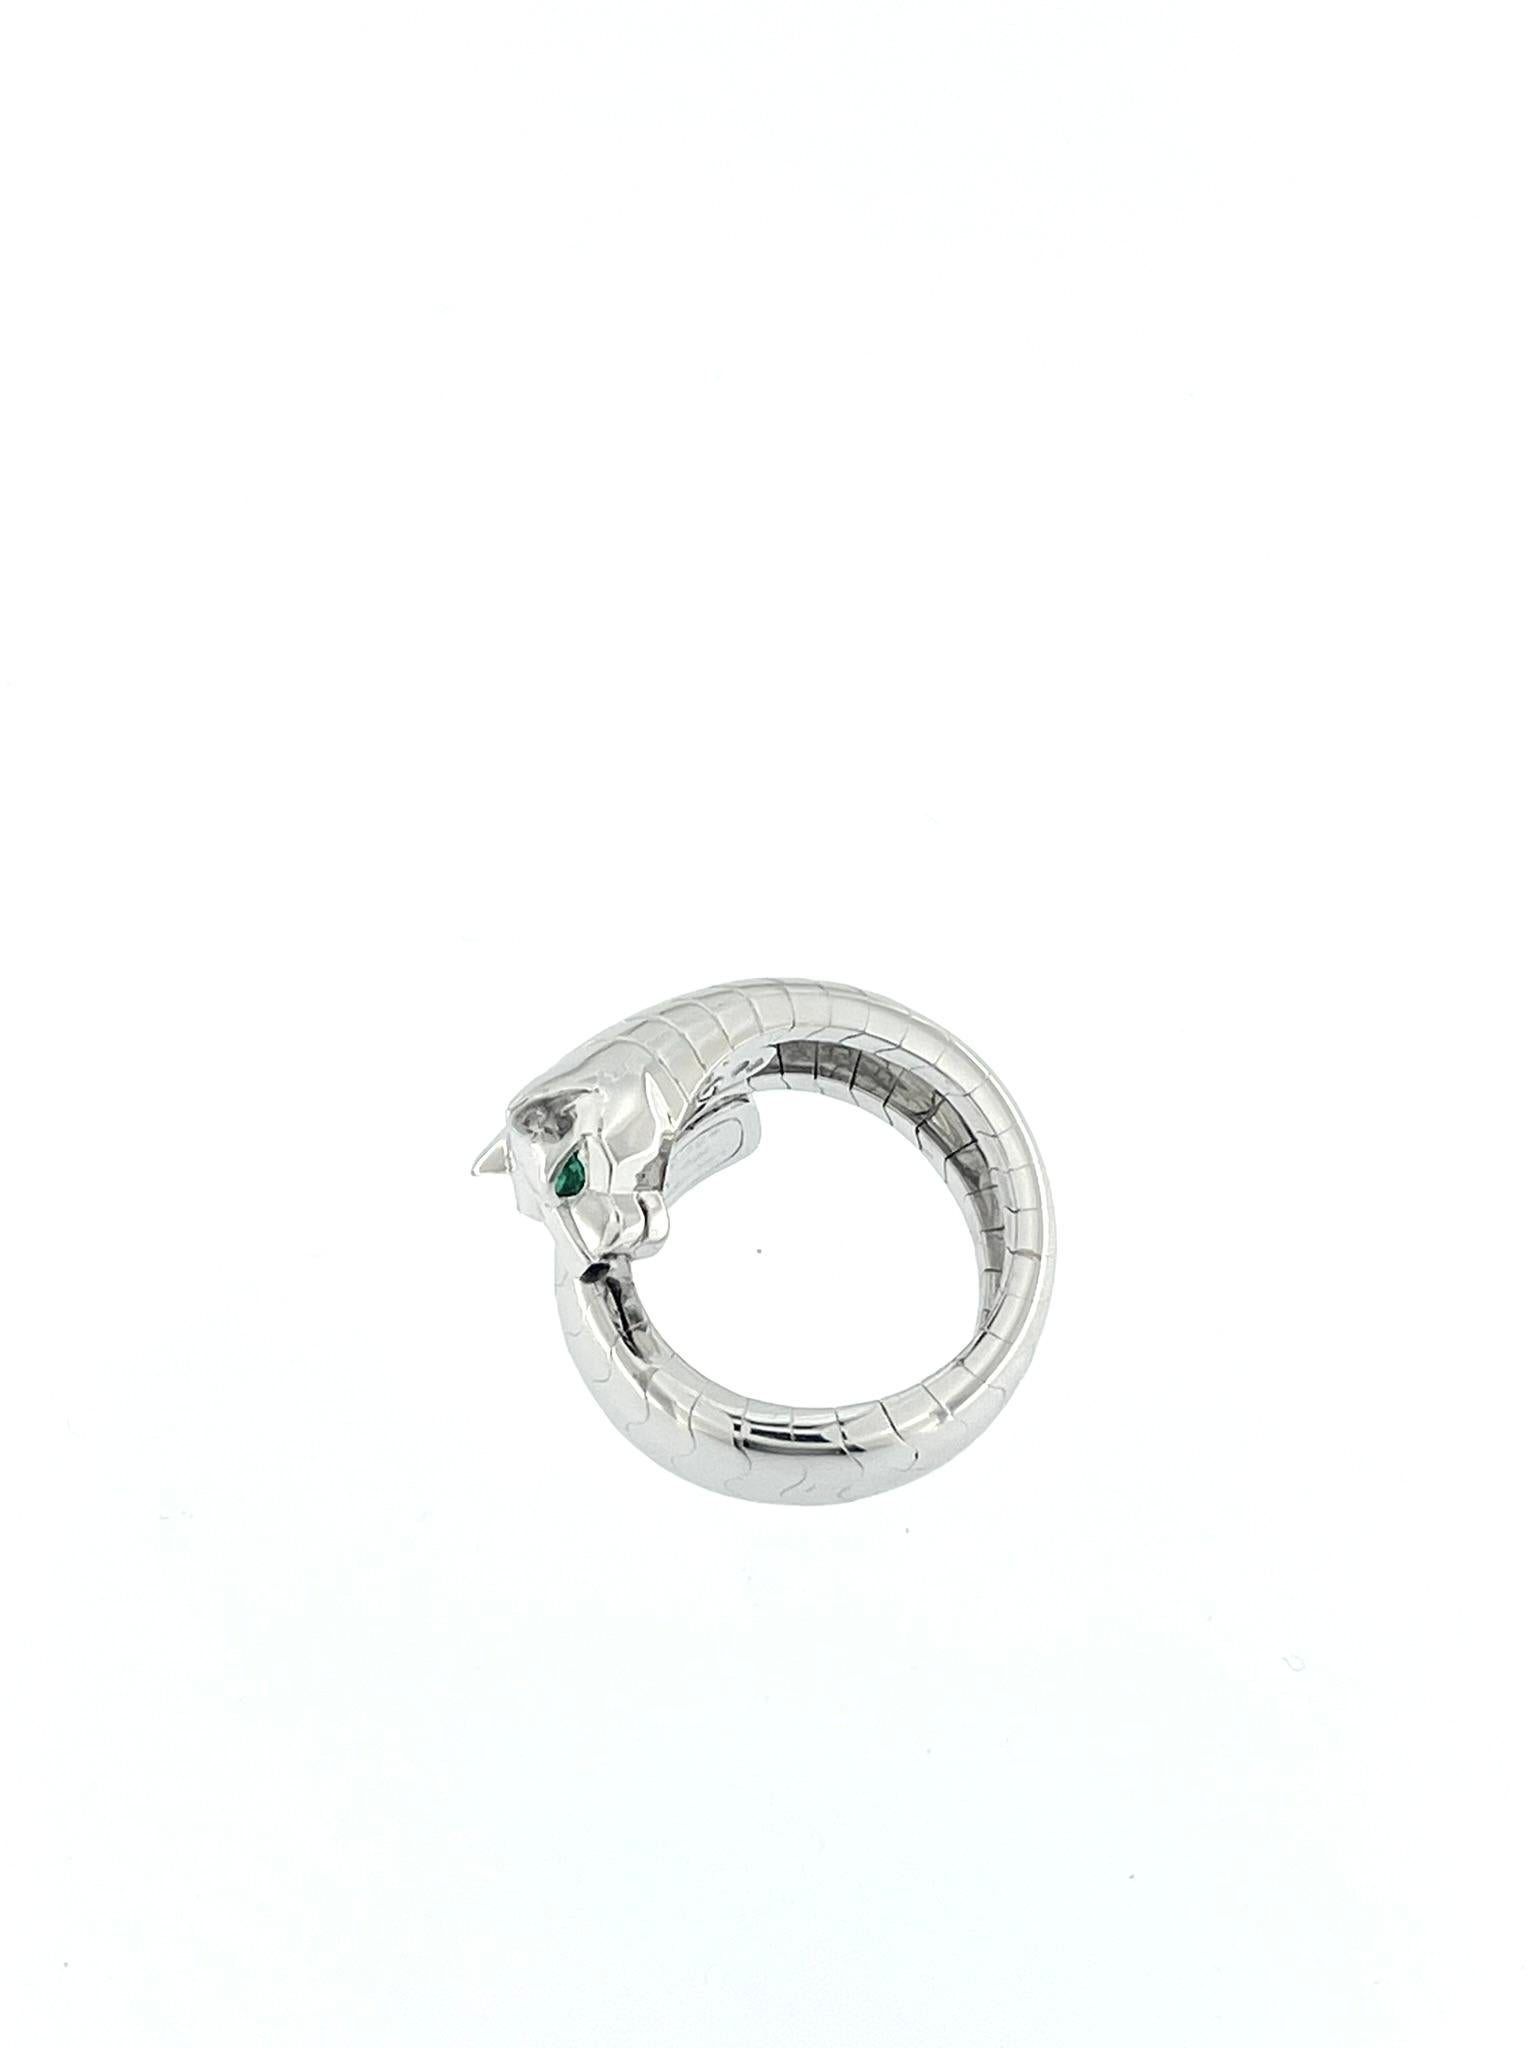 Cartier White Gold Panthere Lakarda Ring Emeralds and Onyx For Sale 1